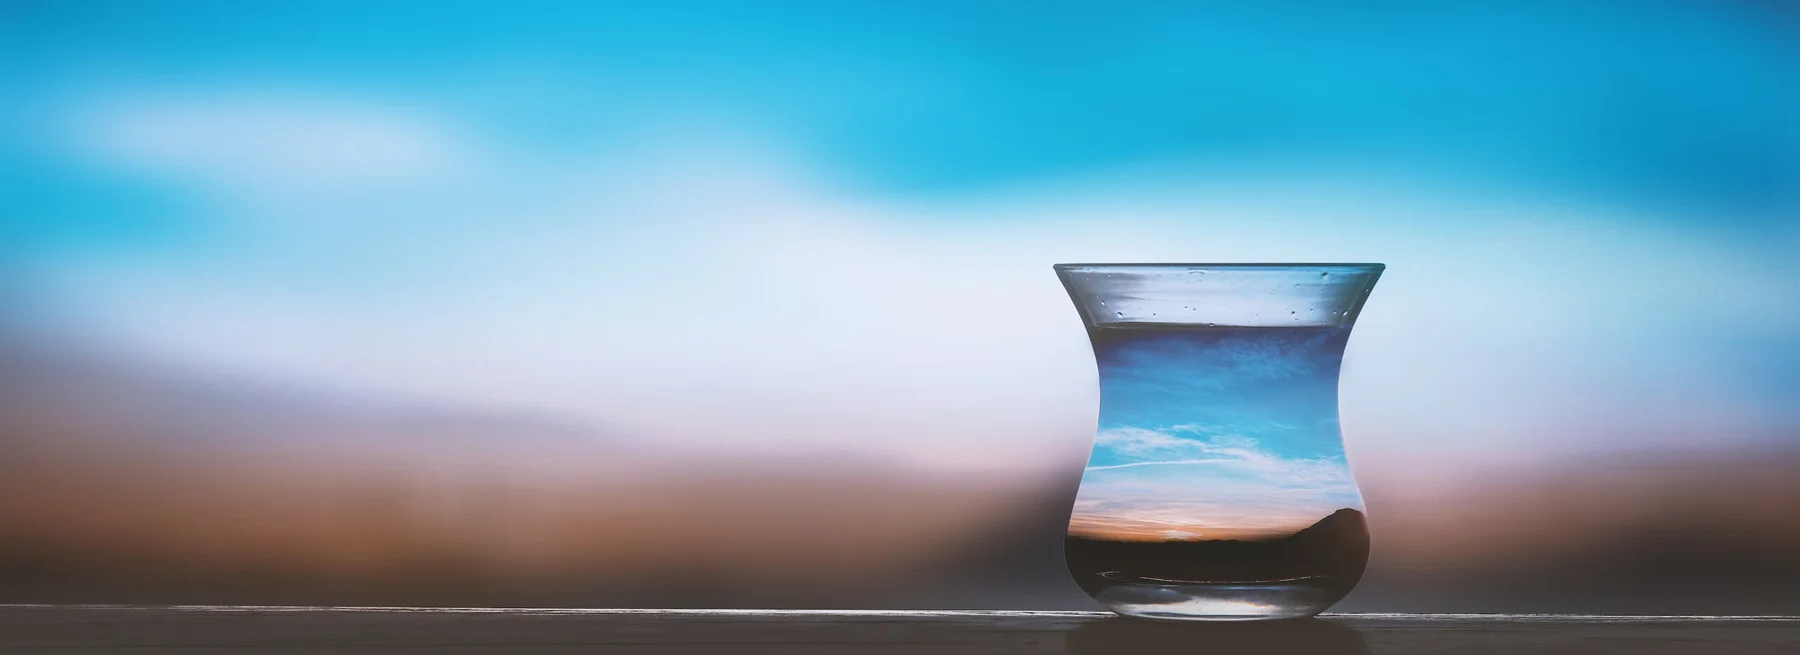 Water glass reflecting the landscape background